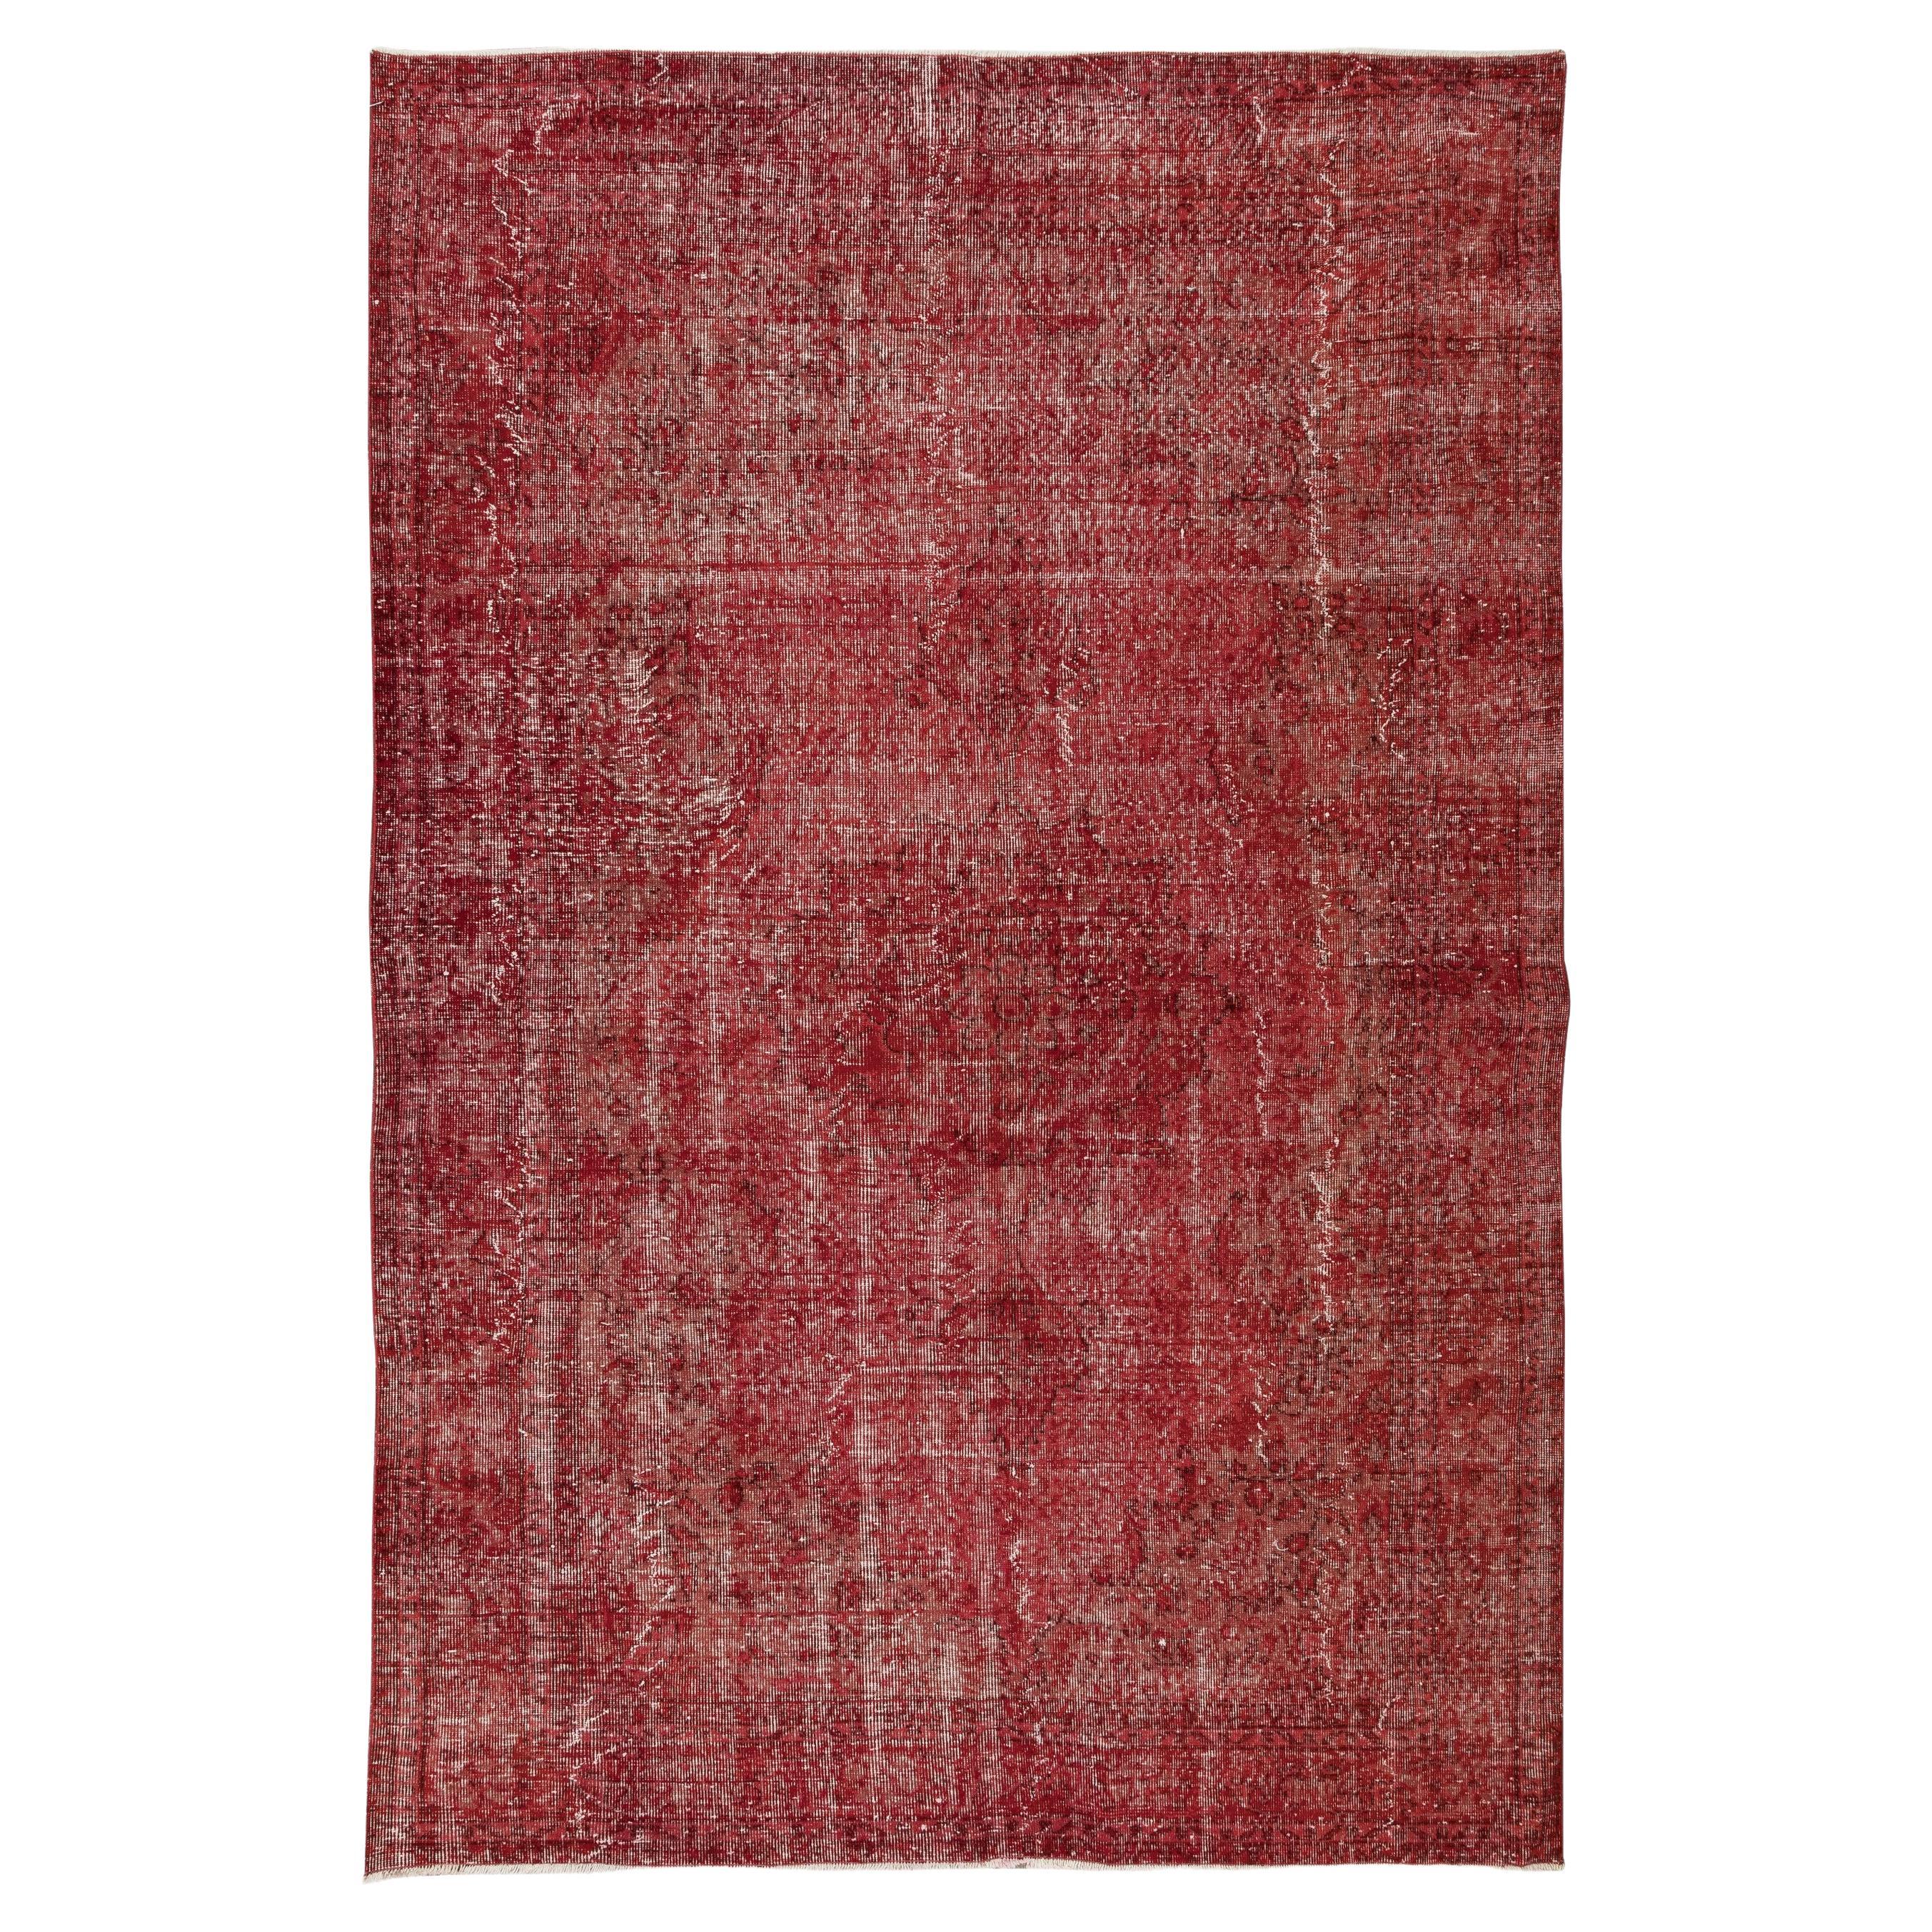 6.7x9.6 Ft Hand Knotted Vintage Turkish Area Rug in Red 4 Modern Interiors